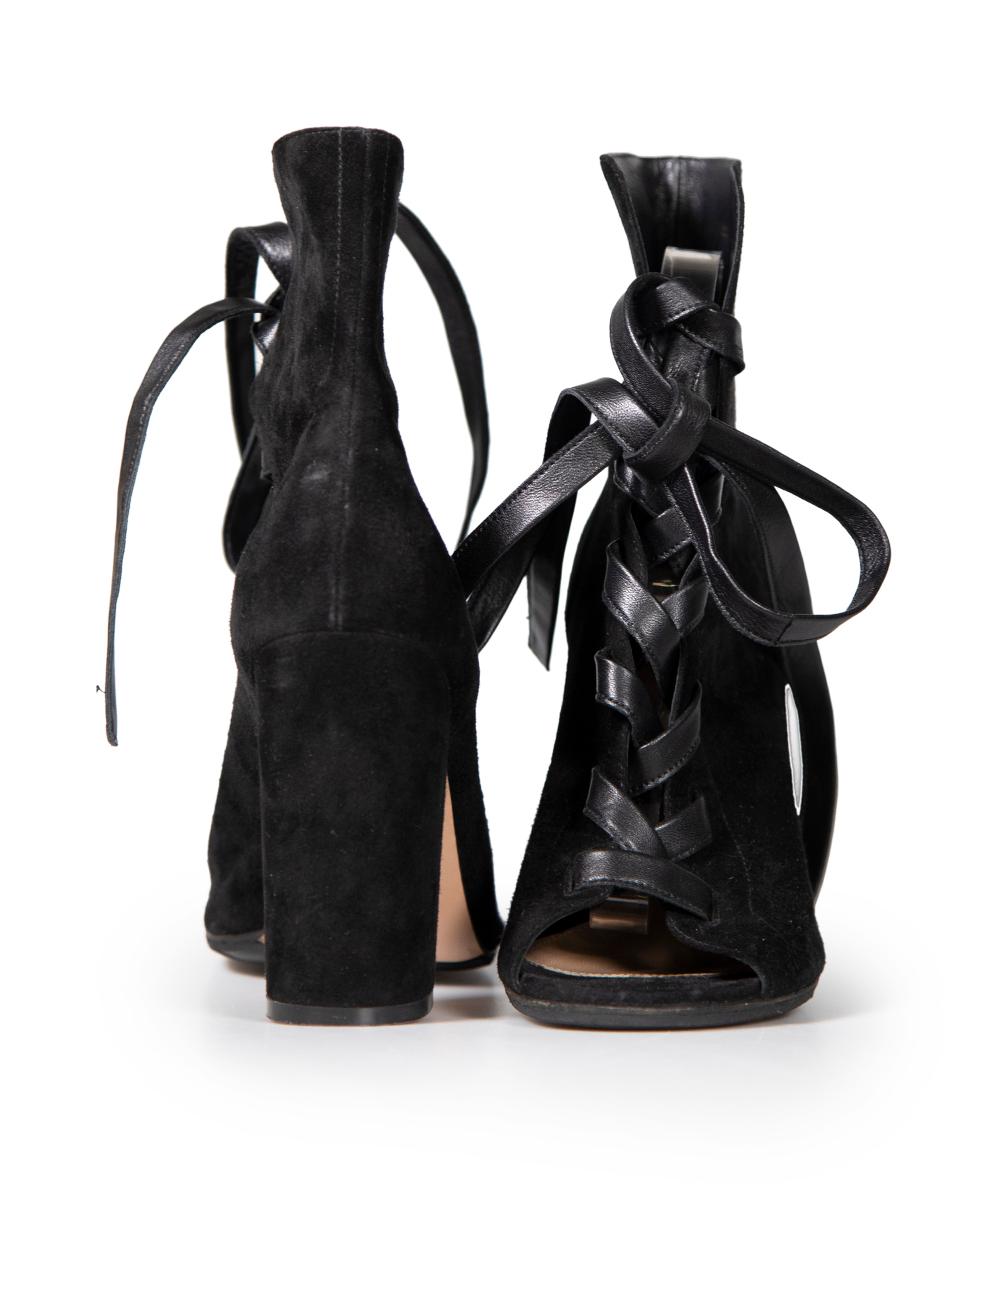 Gianvito Rossi Black Suede Lace-Up Heels Size IT 39.5 In Good Condition For Sale In London, GB